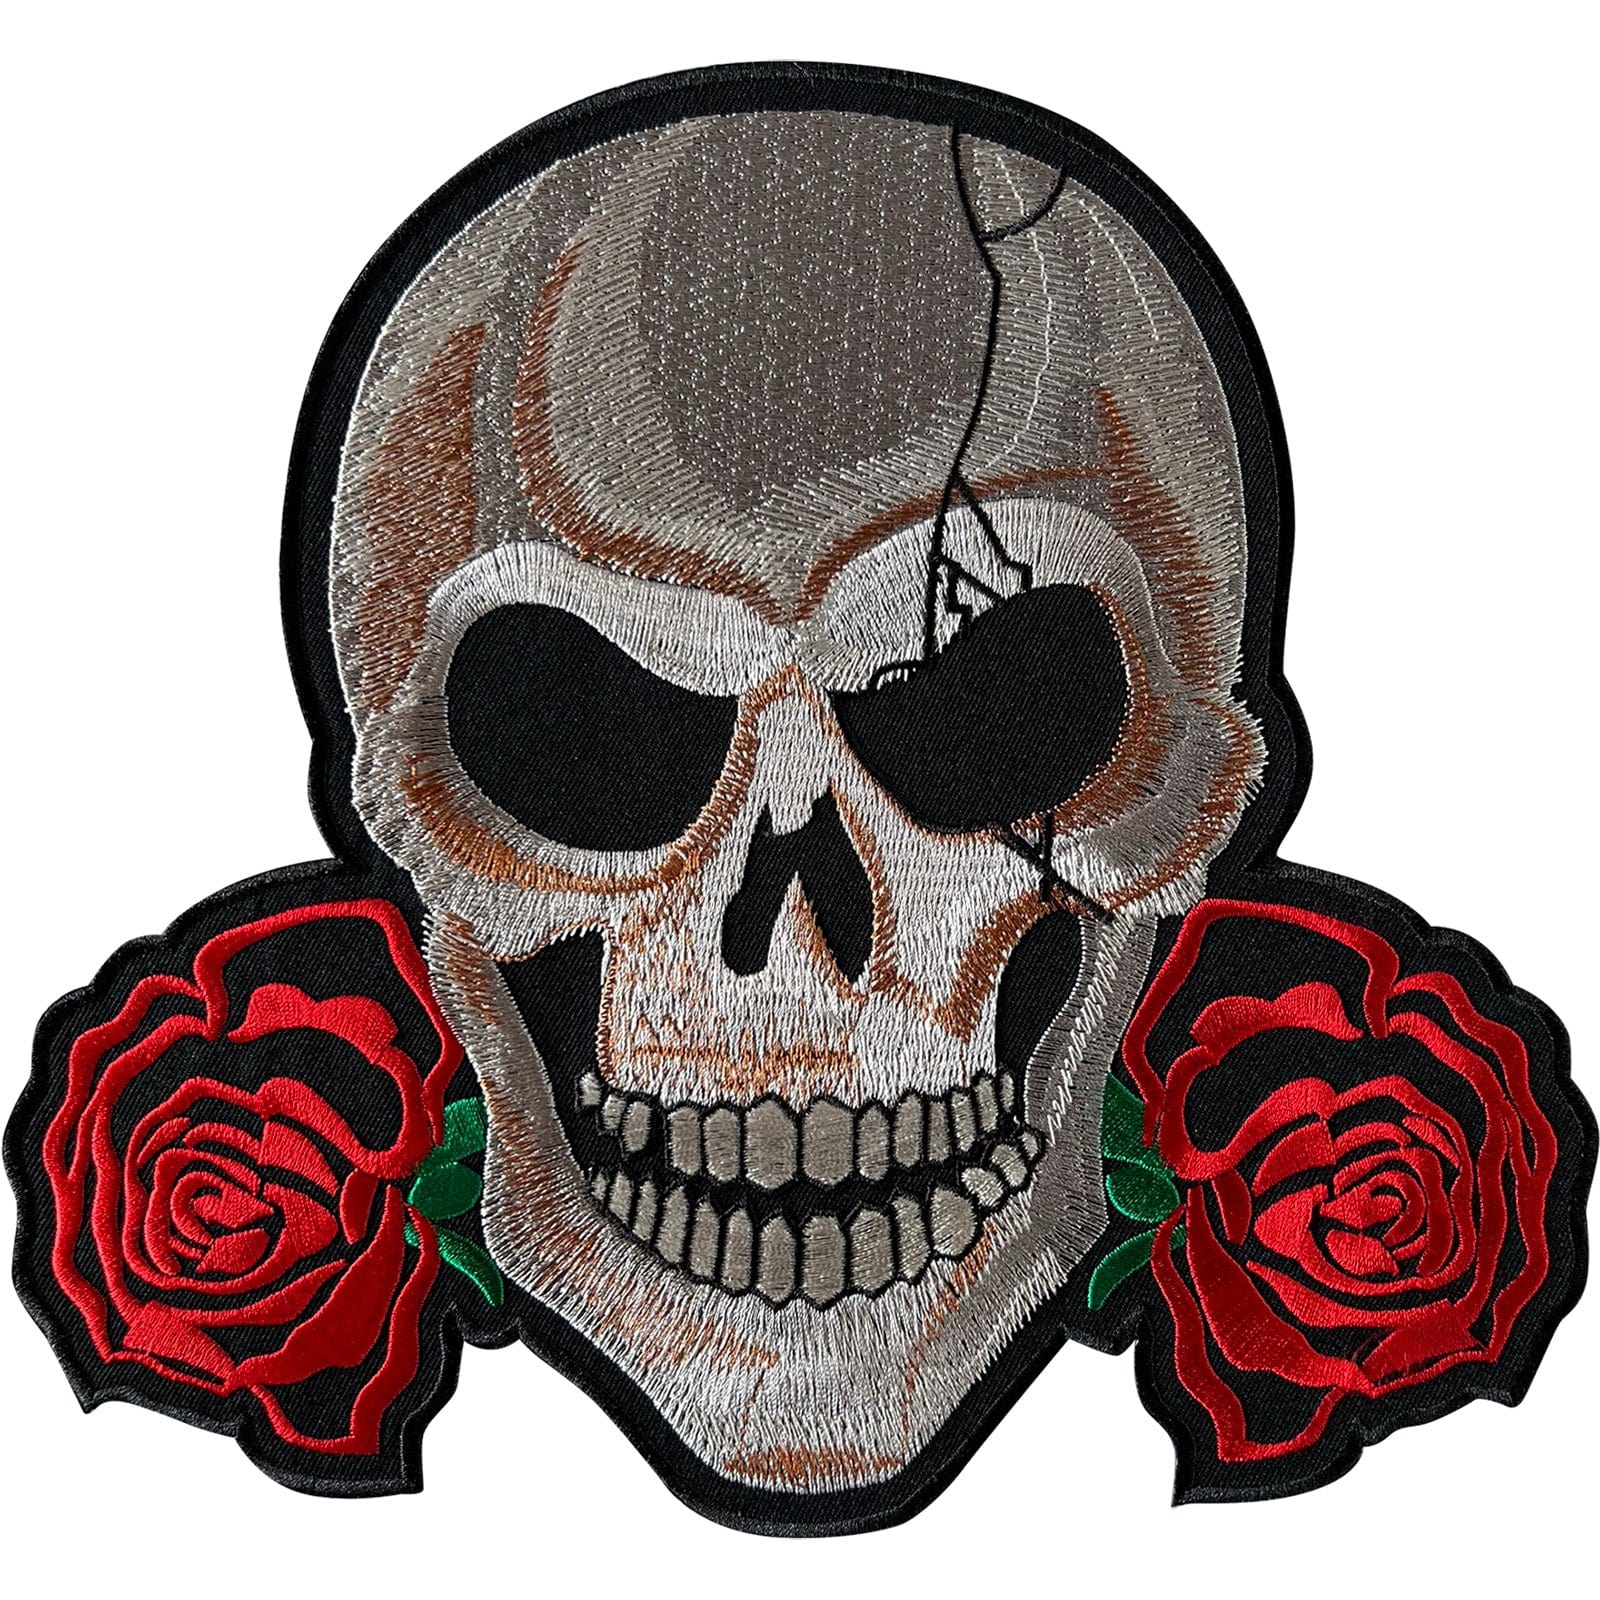 Big Large Skull Red Roses Patch Iron Sew On Clothes Jacket Bag Embroidered Badge